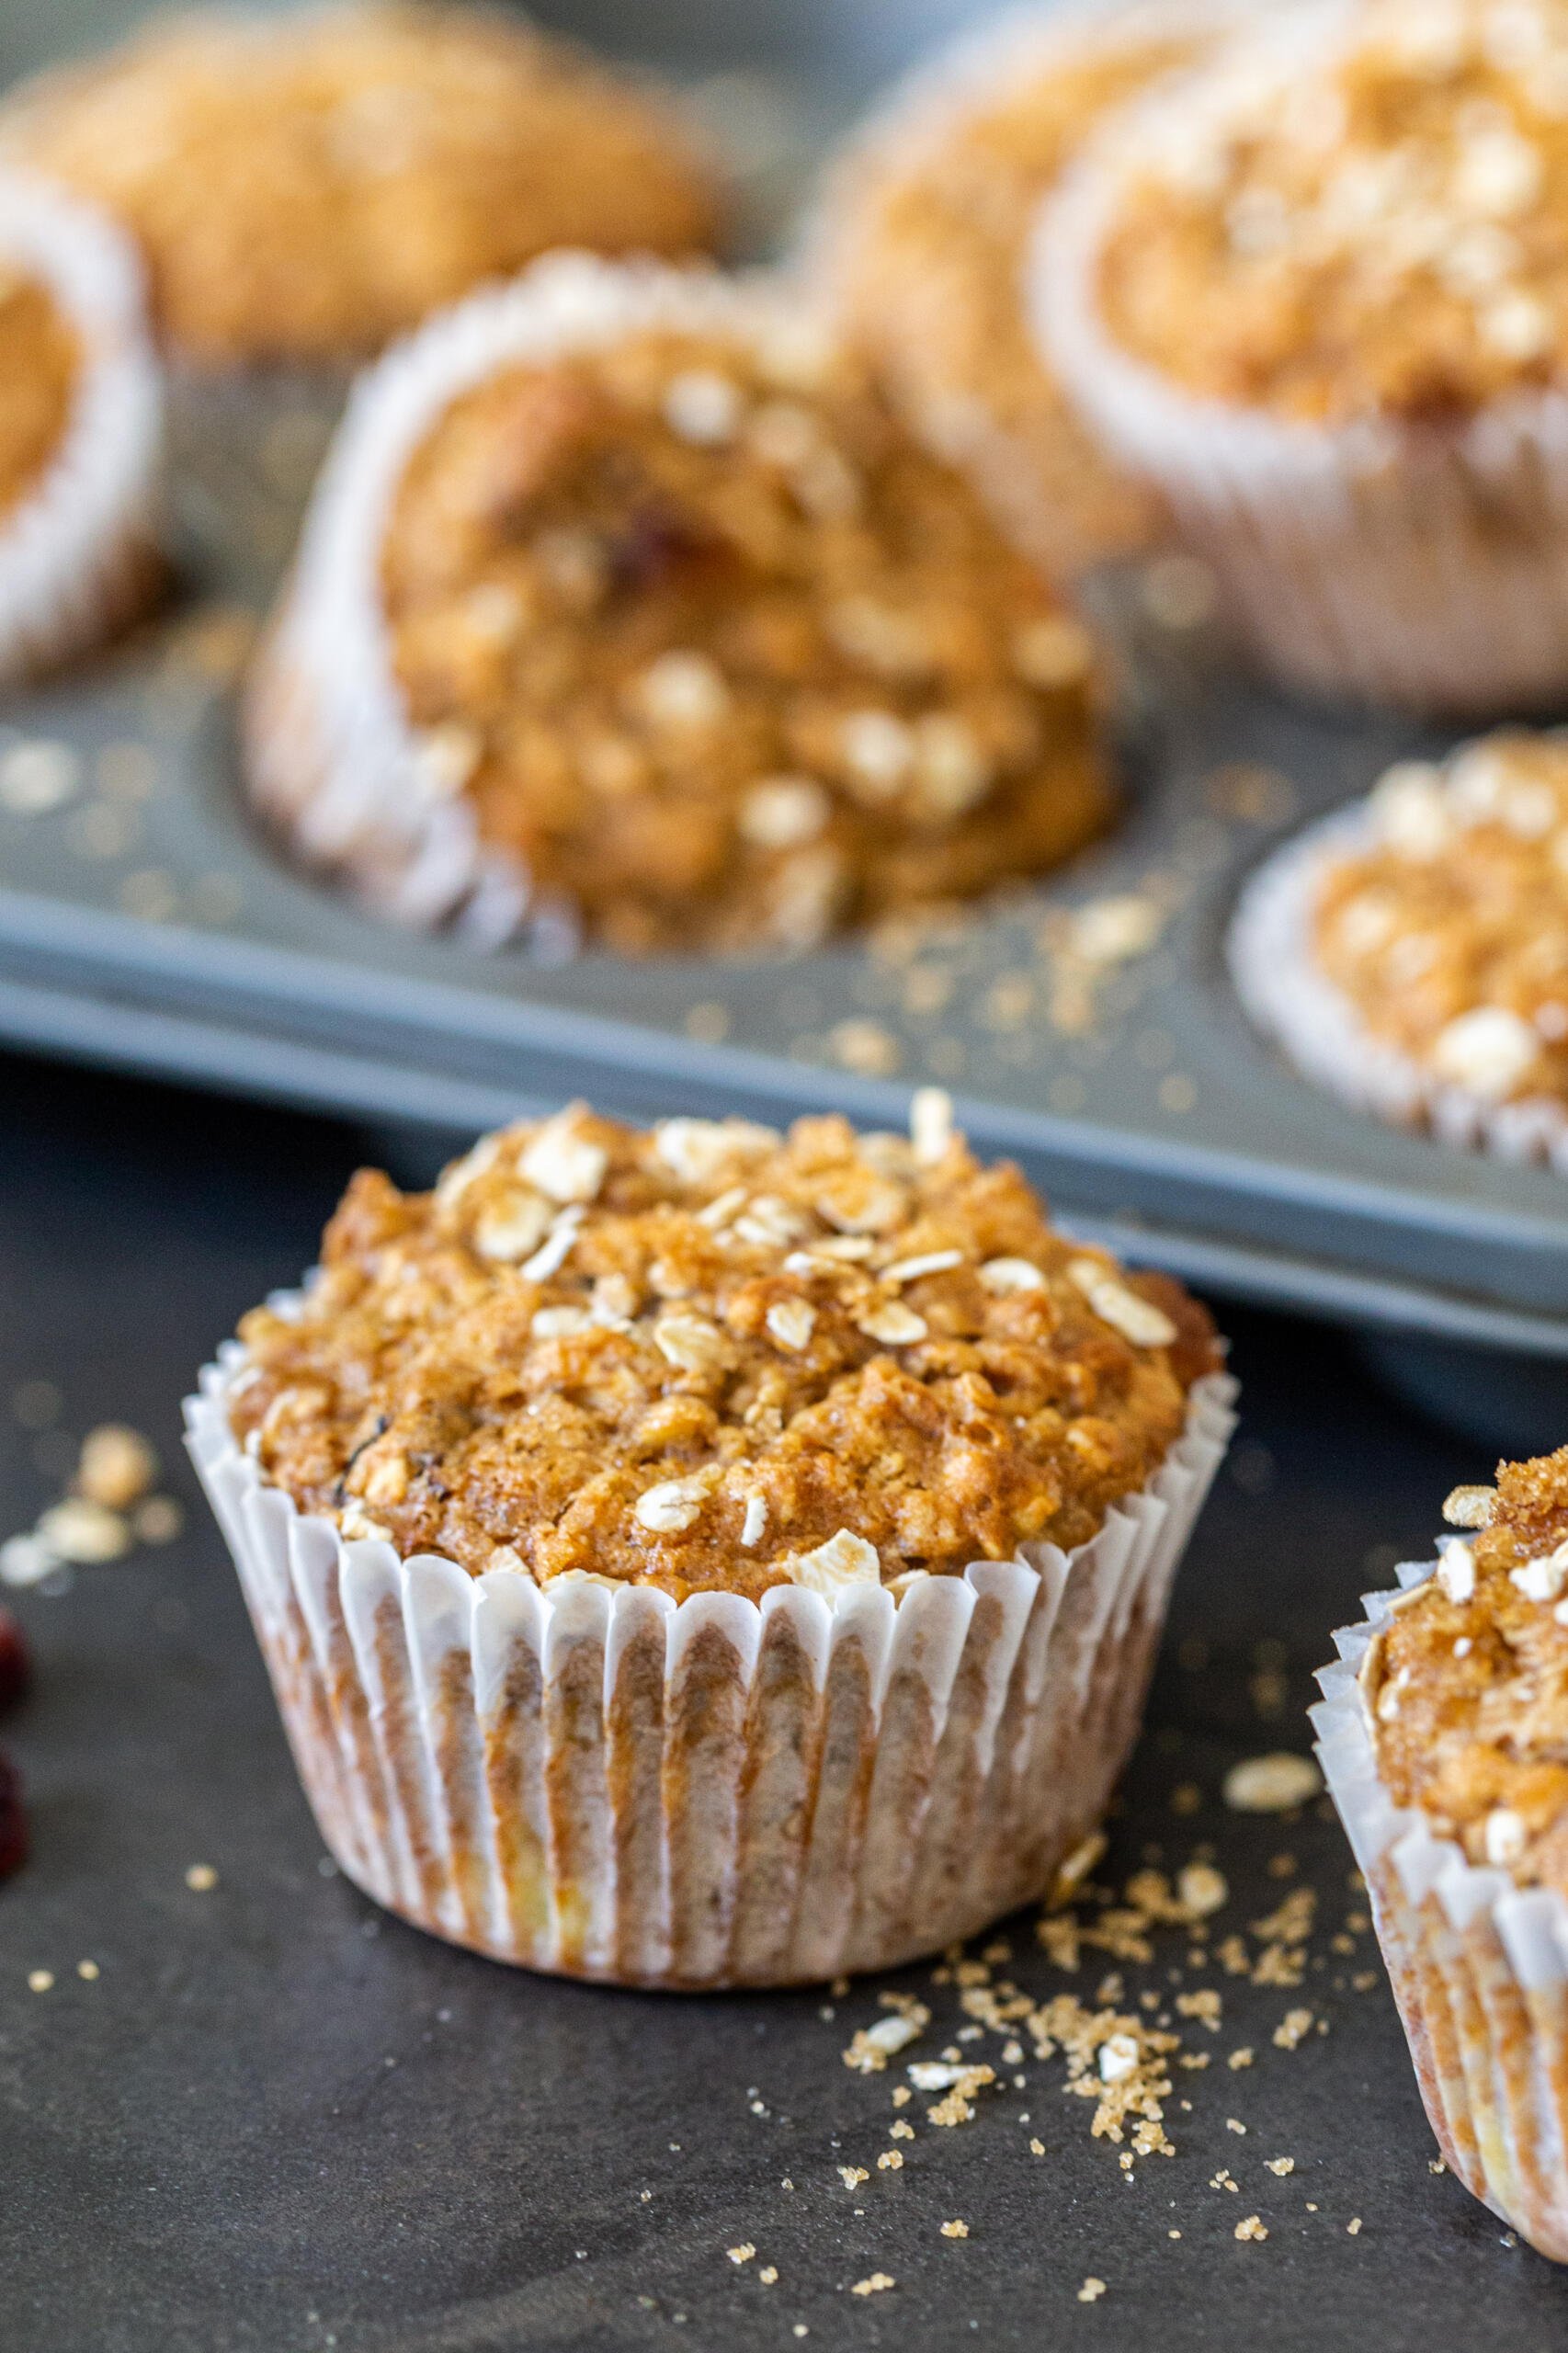 Toasted Oat and Prune Breakfast Muffins Recipe